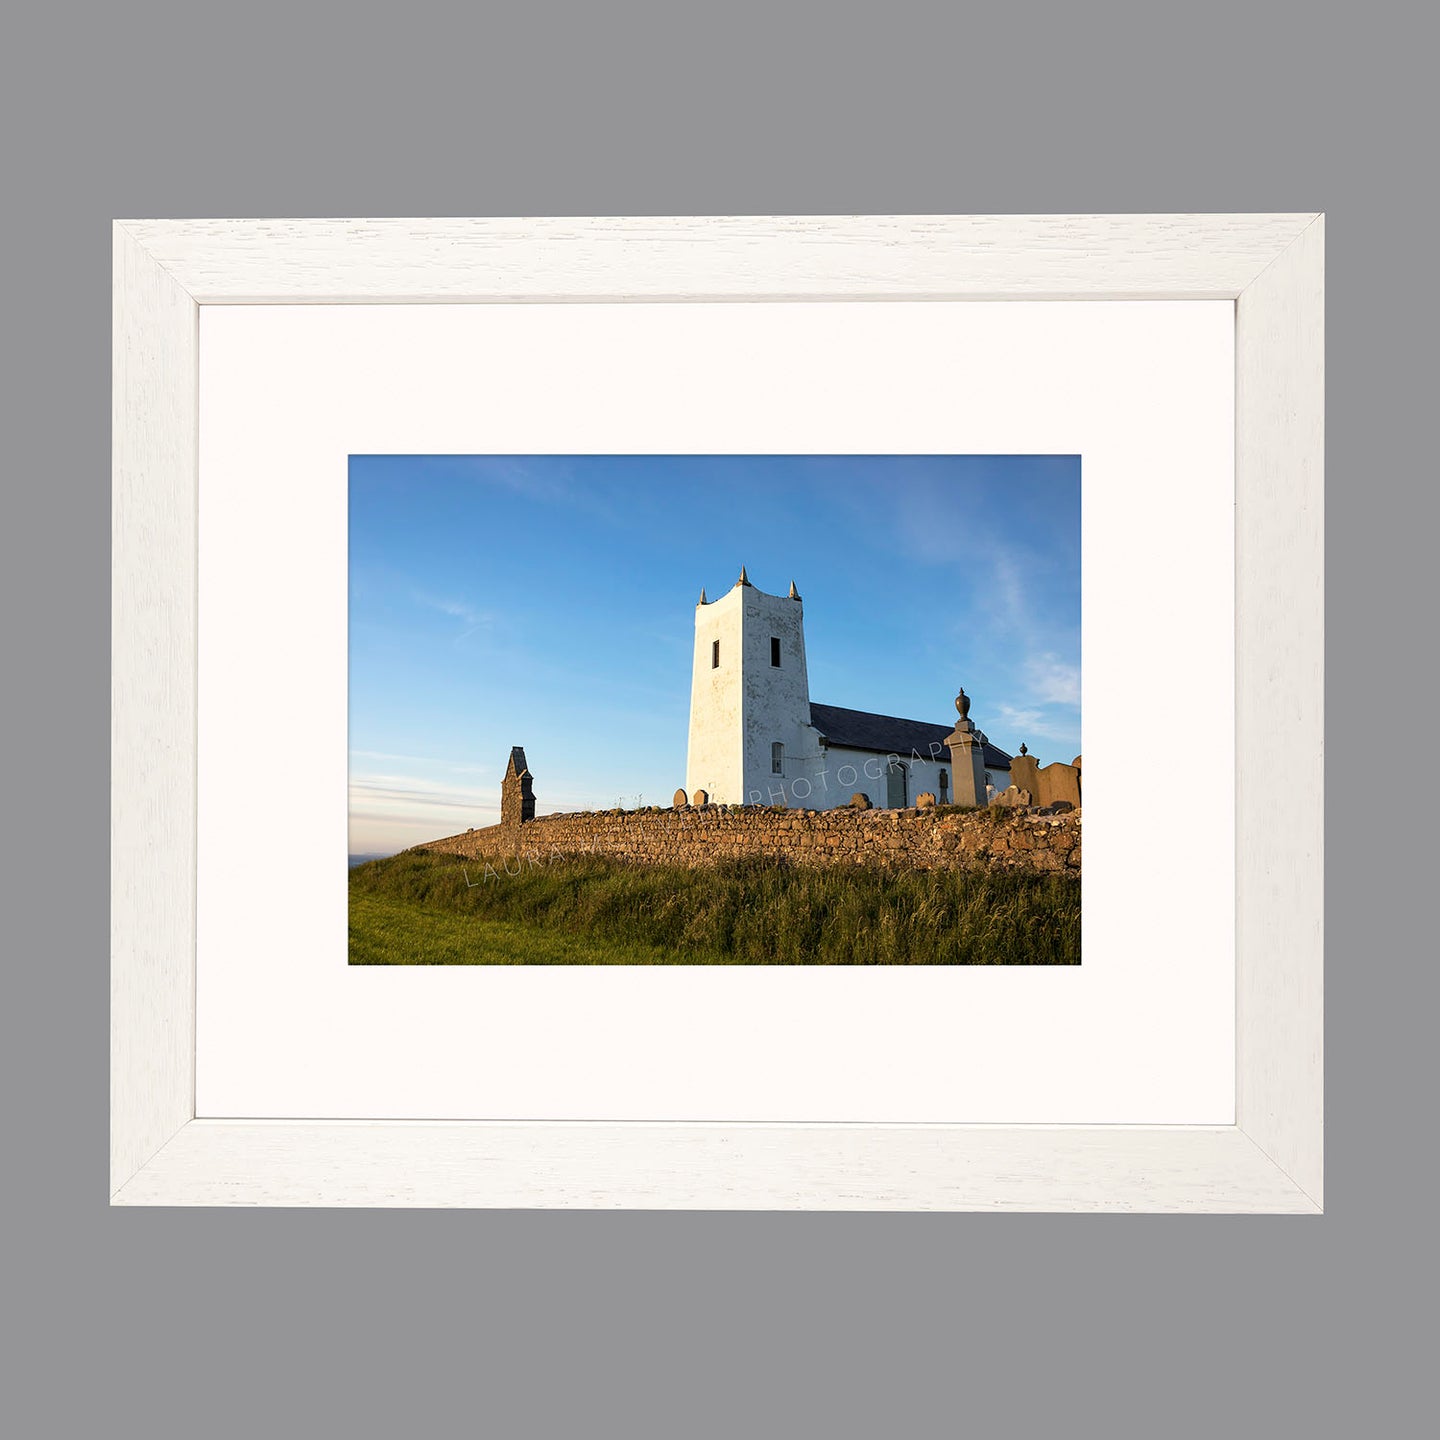 'The Wee Church' - Ballintoy Small Print Framed